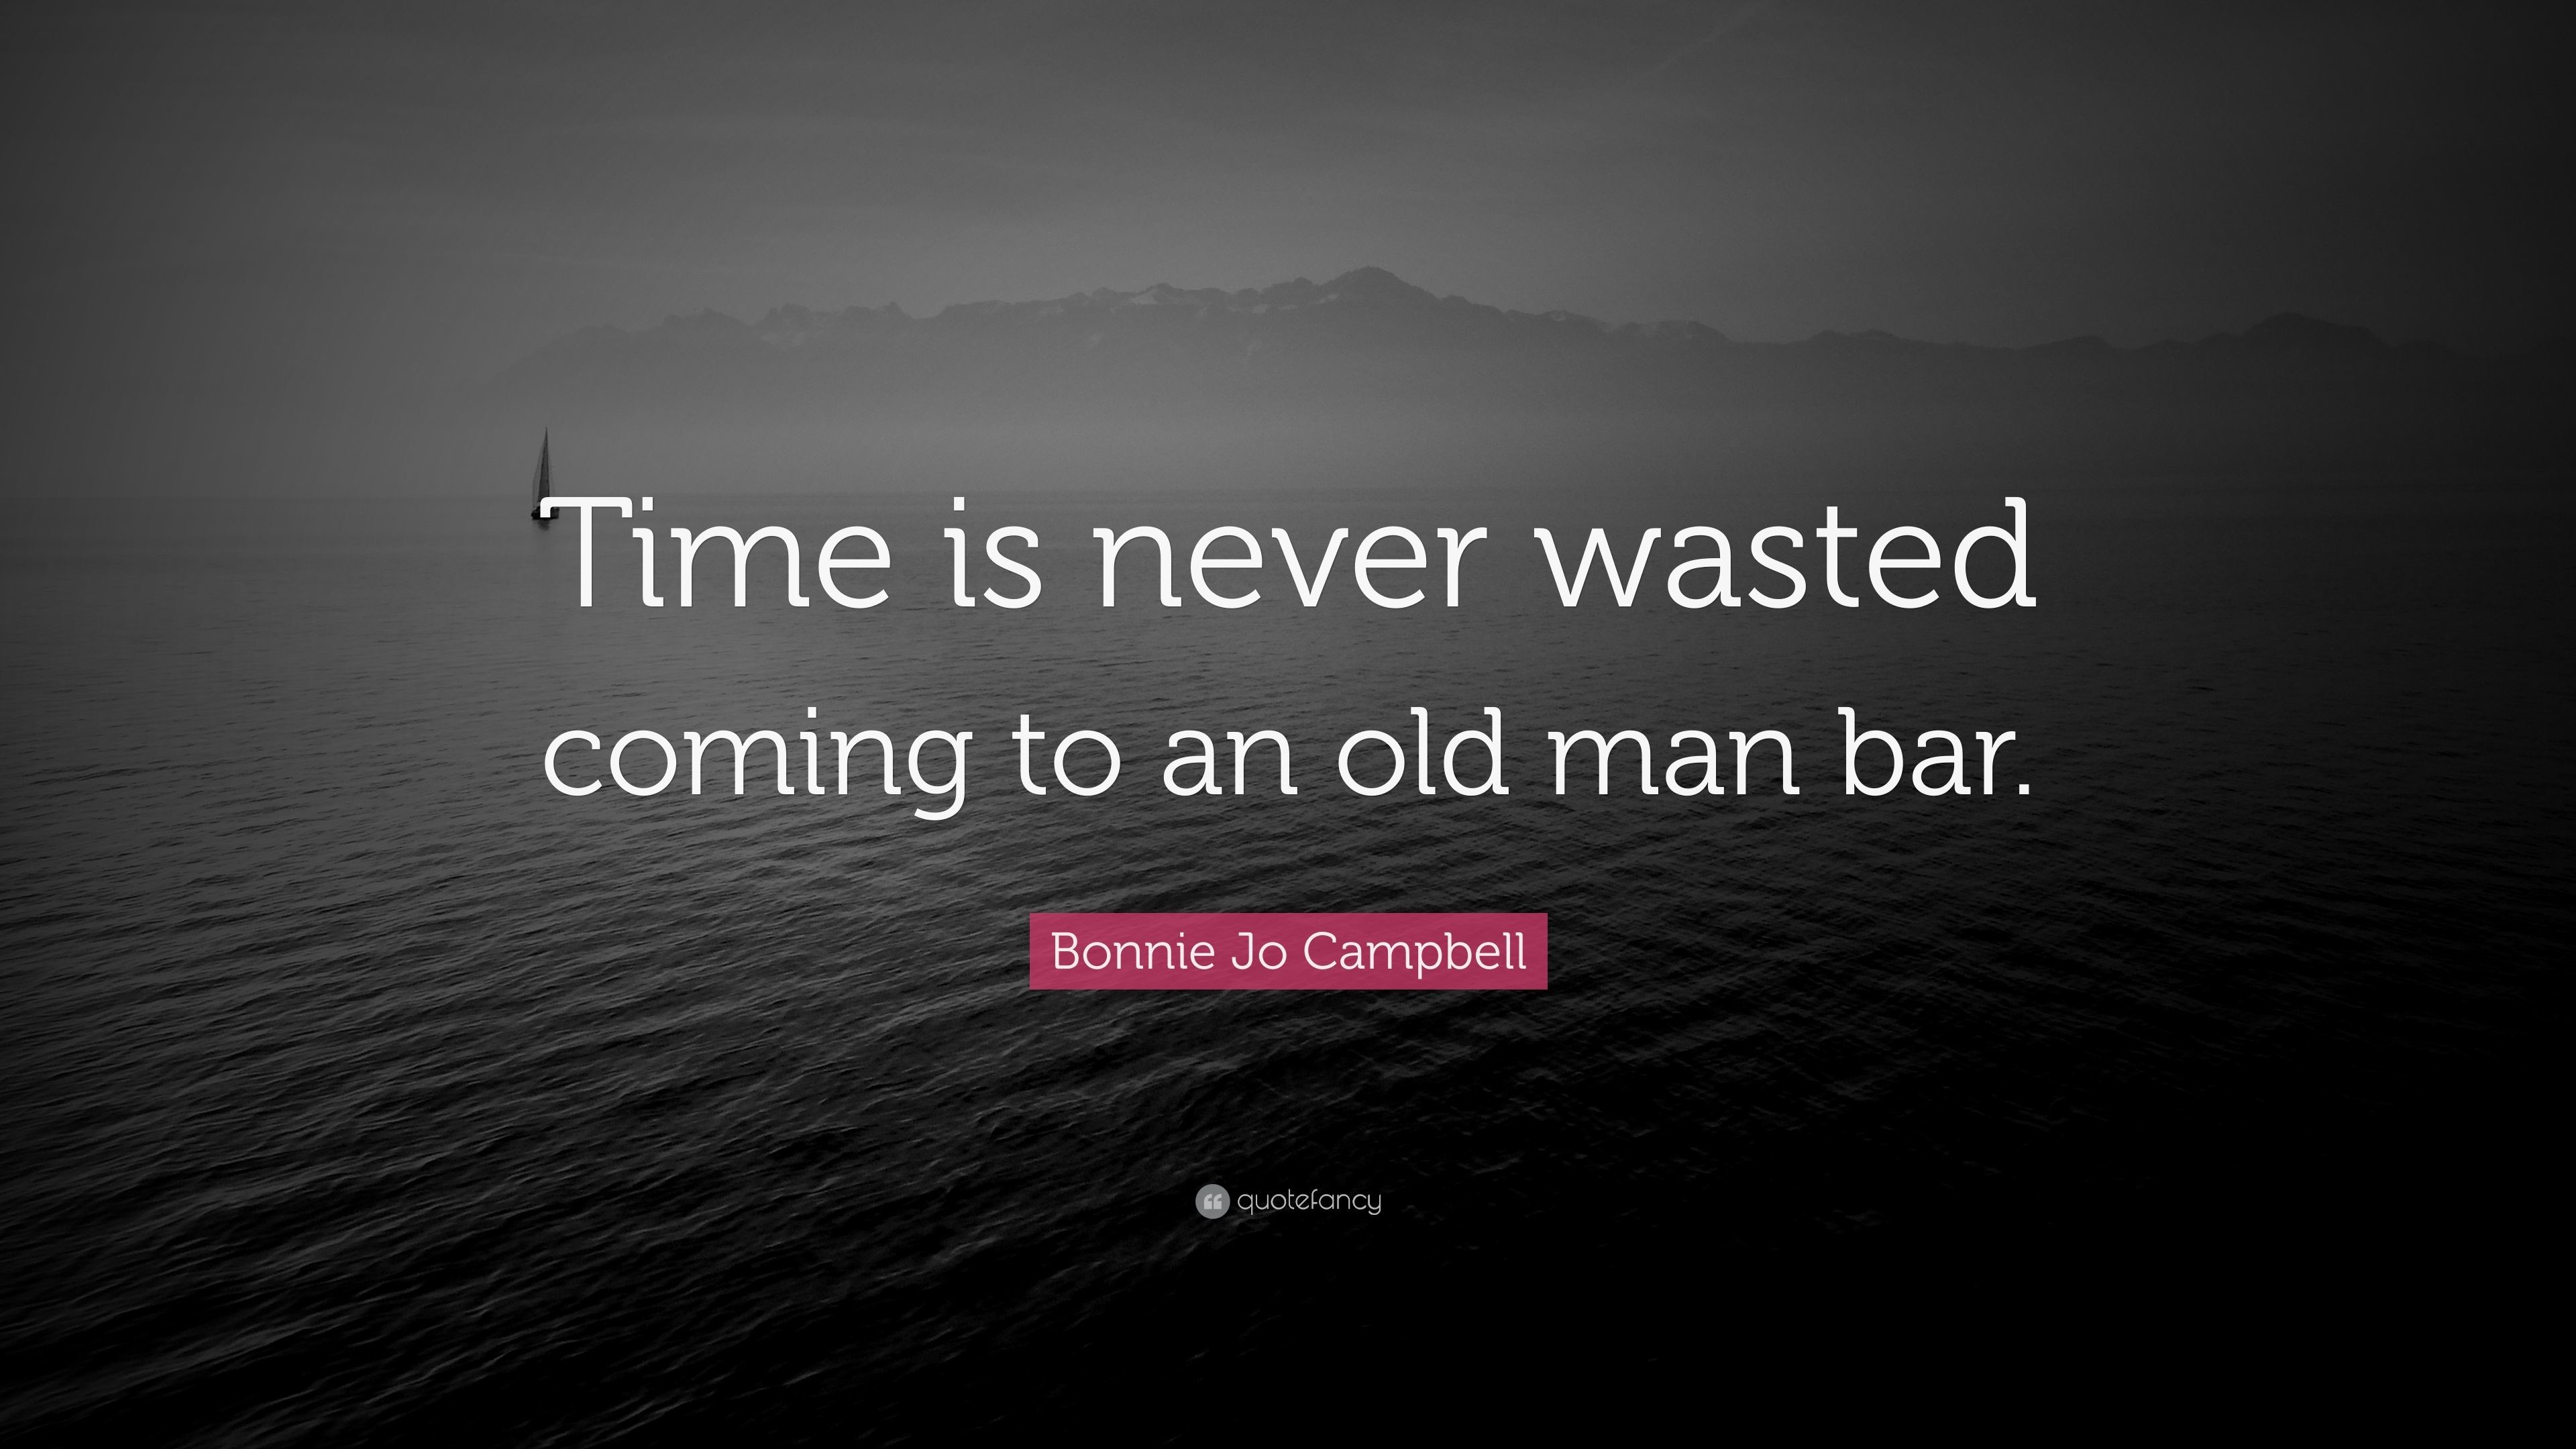 3840x2160 Bonnie Jo Campbell Quote: “Time is never wasted coming to an old man bar